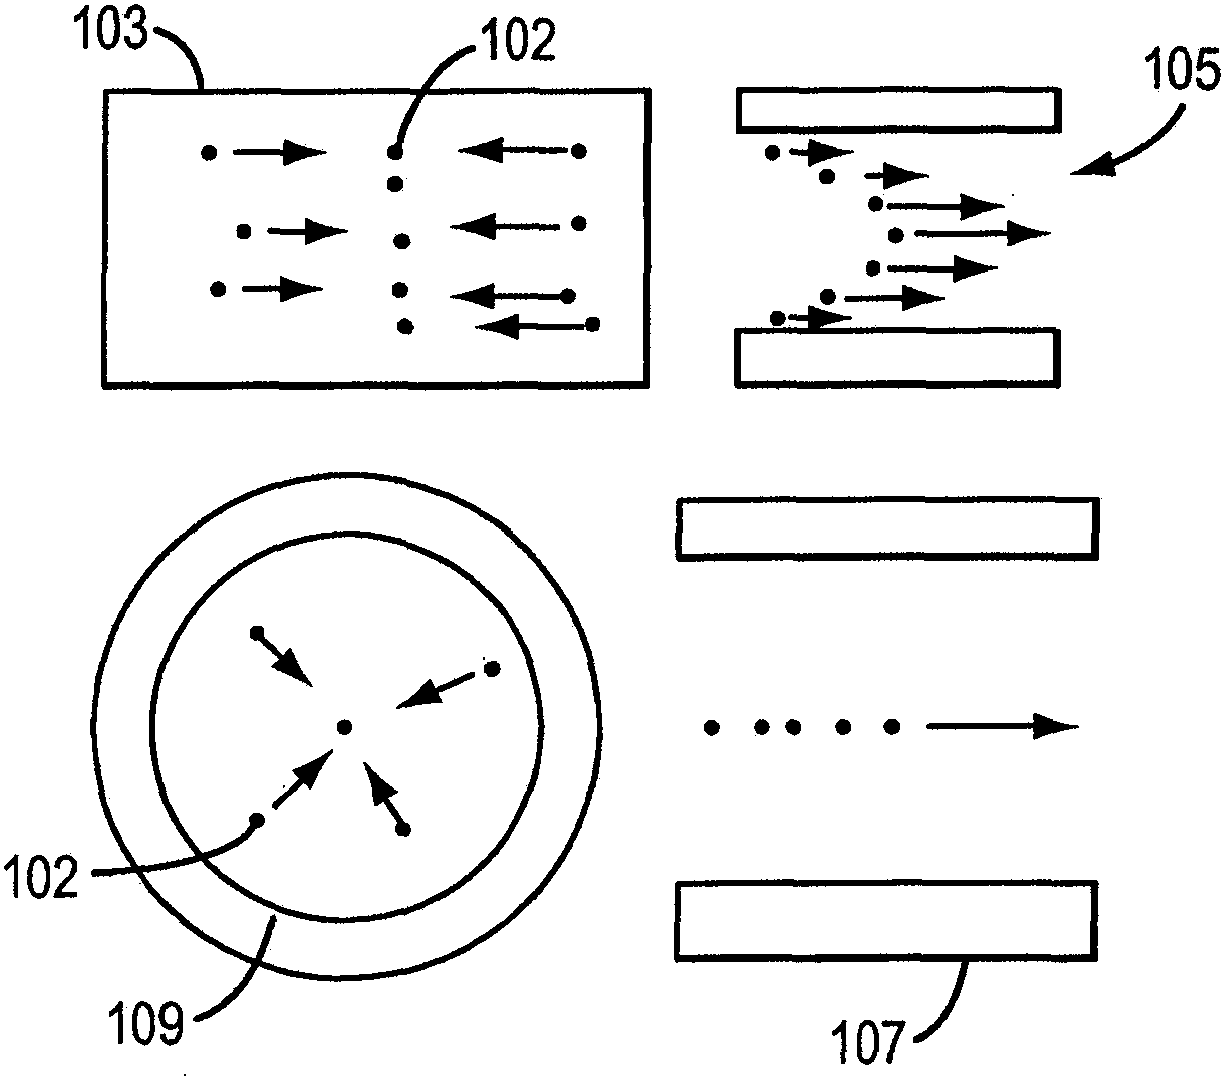 Devices, systems, methods and computer readable media for acoustic flow cytometry